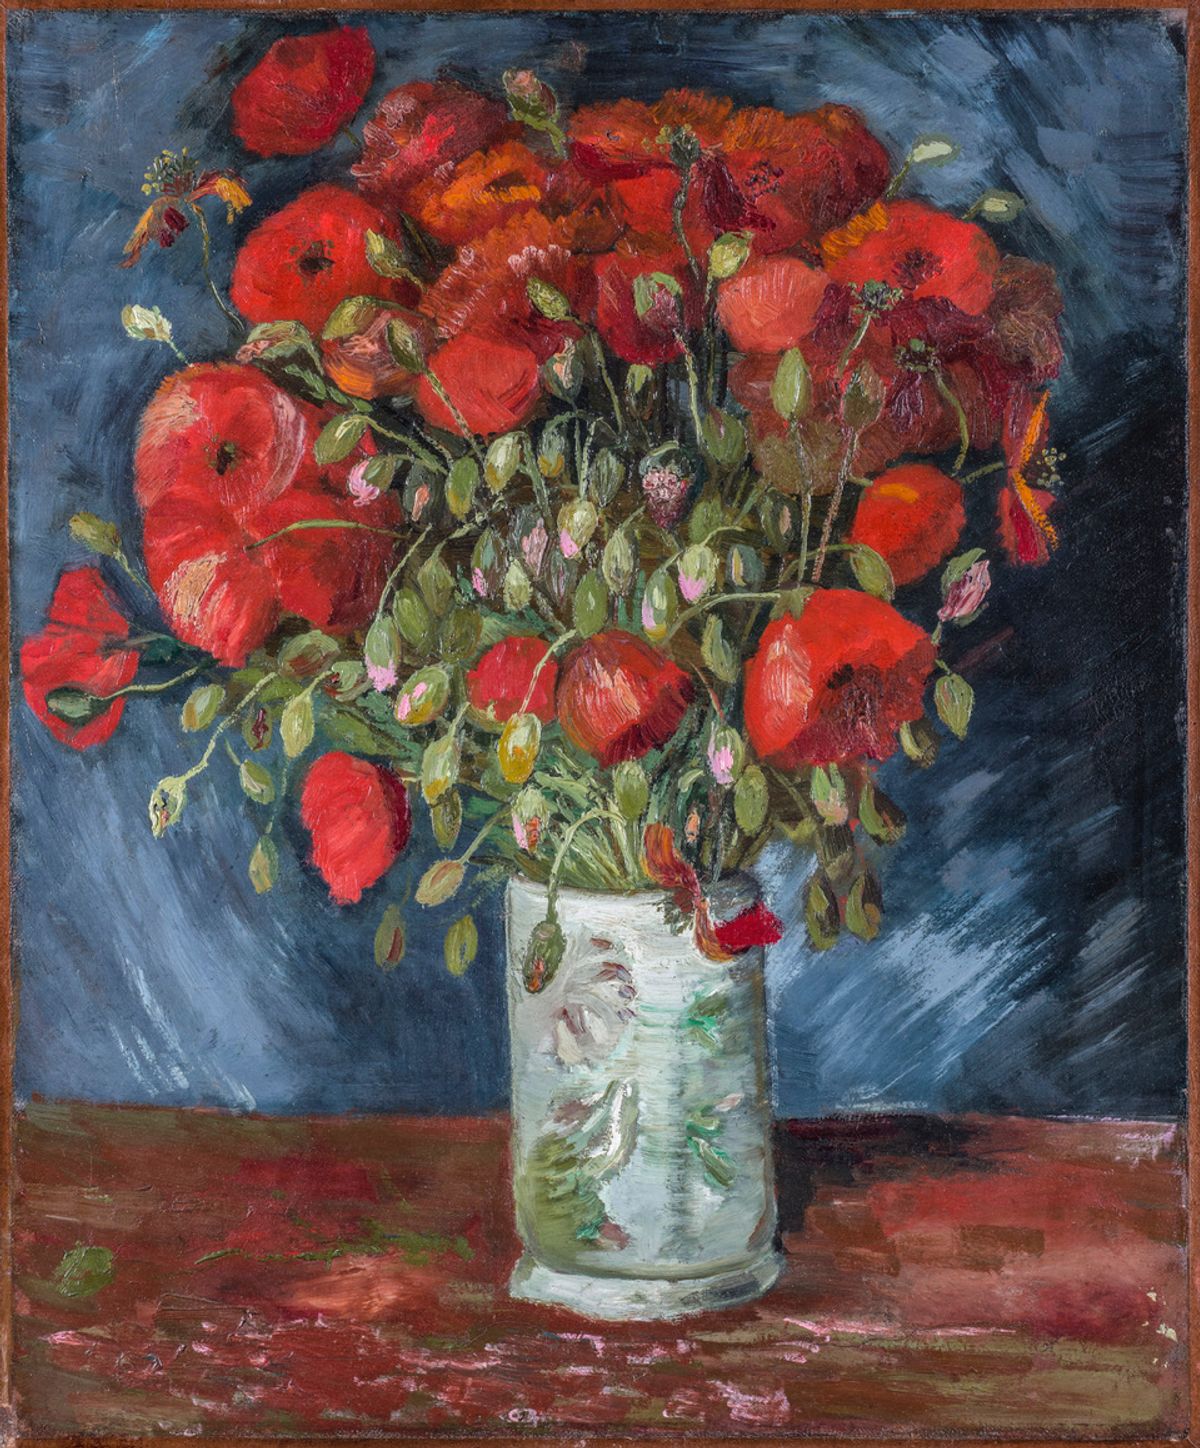 Van Gogh, Vase of Poppies (1886), Wadsworth Atheneum Museum of Art, Hartford, Connecticut, Bequest of Anne Parrish Titzell 